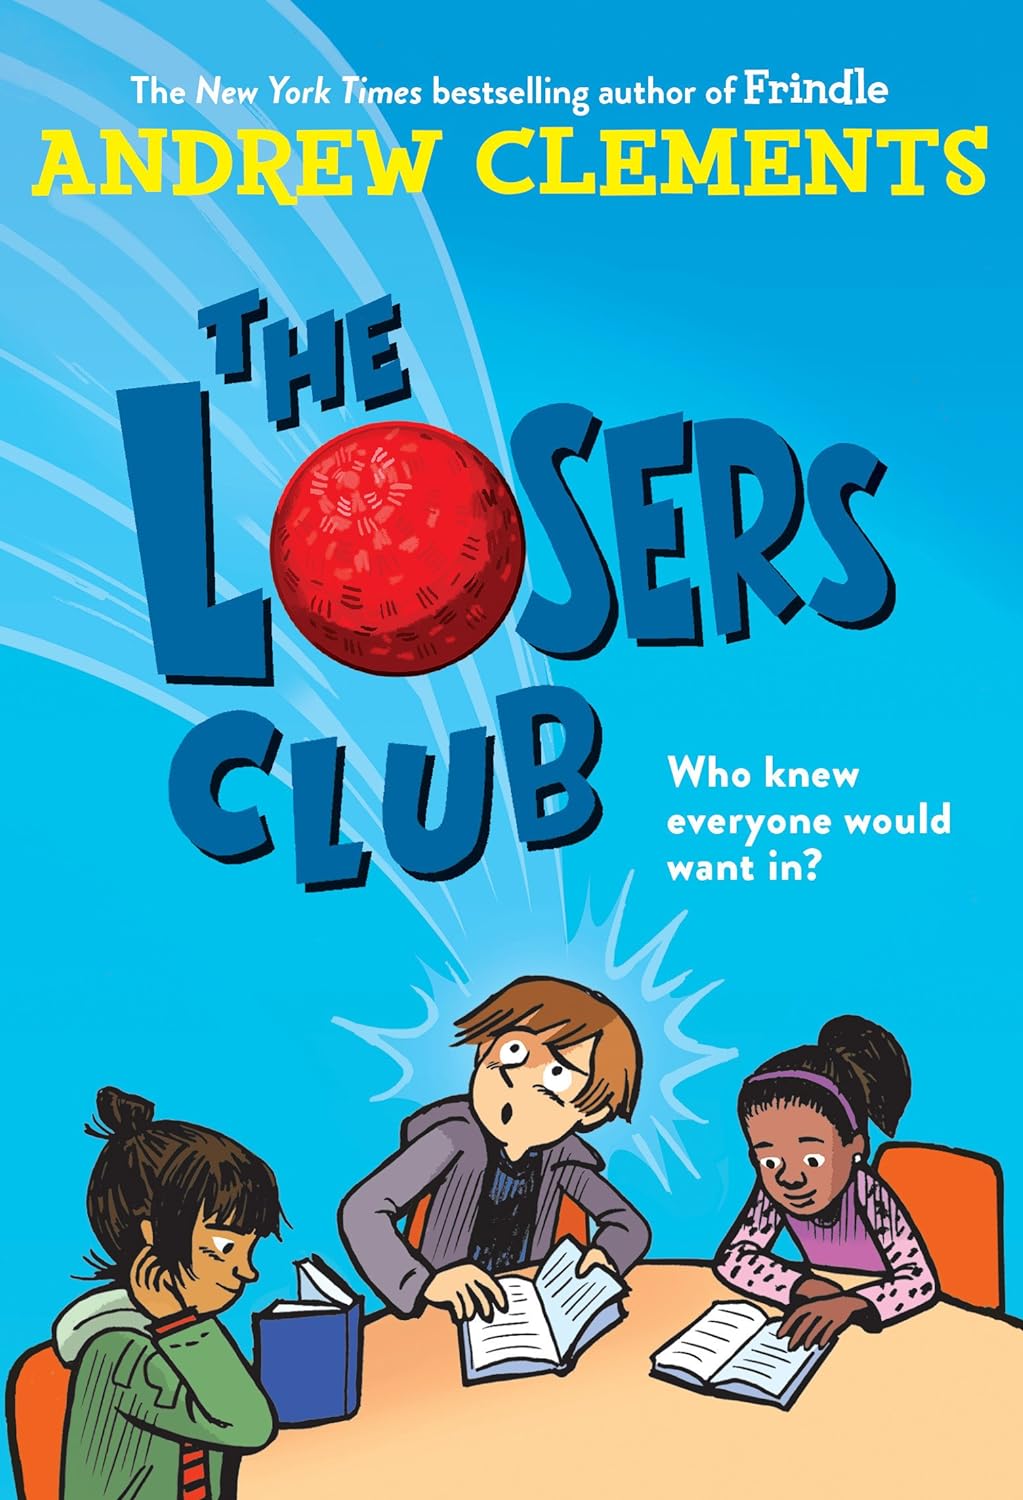 Book Cover
The New York Times bestselling author of Frindle
Andrew Clements
The Losers Club
Who knew everyone would want in?
Illustration of three children reading. One looks like he's just been smacked by a ball that has flown up to form the O in Losers.